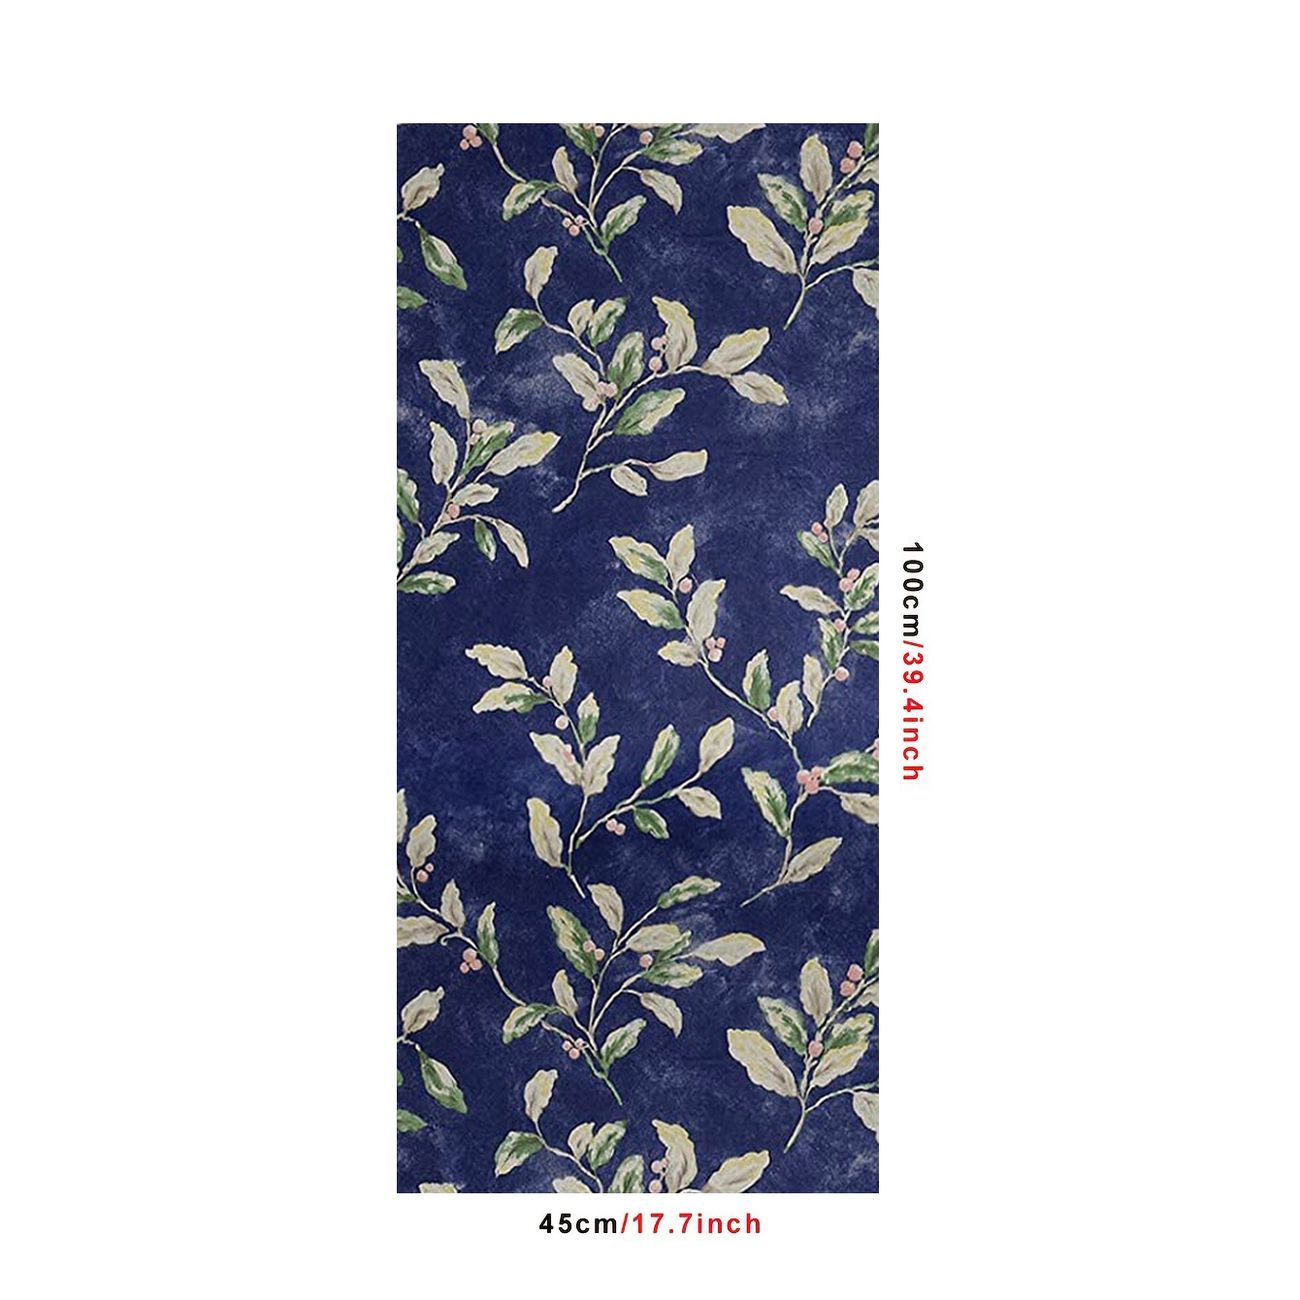 1pc Dark Blue European Retro Floral Pattern Self Adhesive Contact Paper  Removable Waterproof Peel And Stick Wallpaper For Refrigerator Speaker  Dryer Cabinet Oven Appliance Furniture Home Decor Room Background Kitchen |  Shop